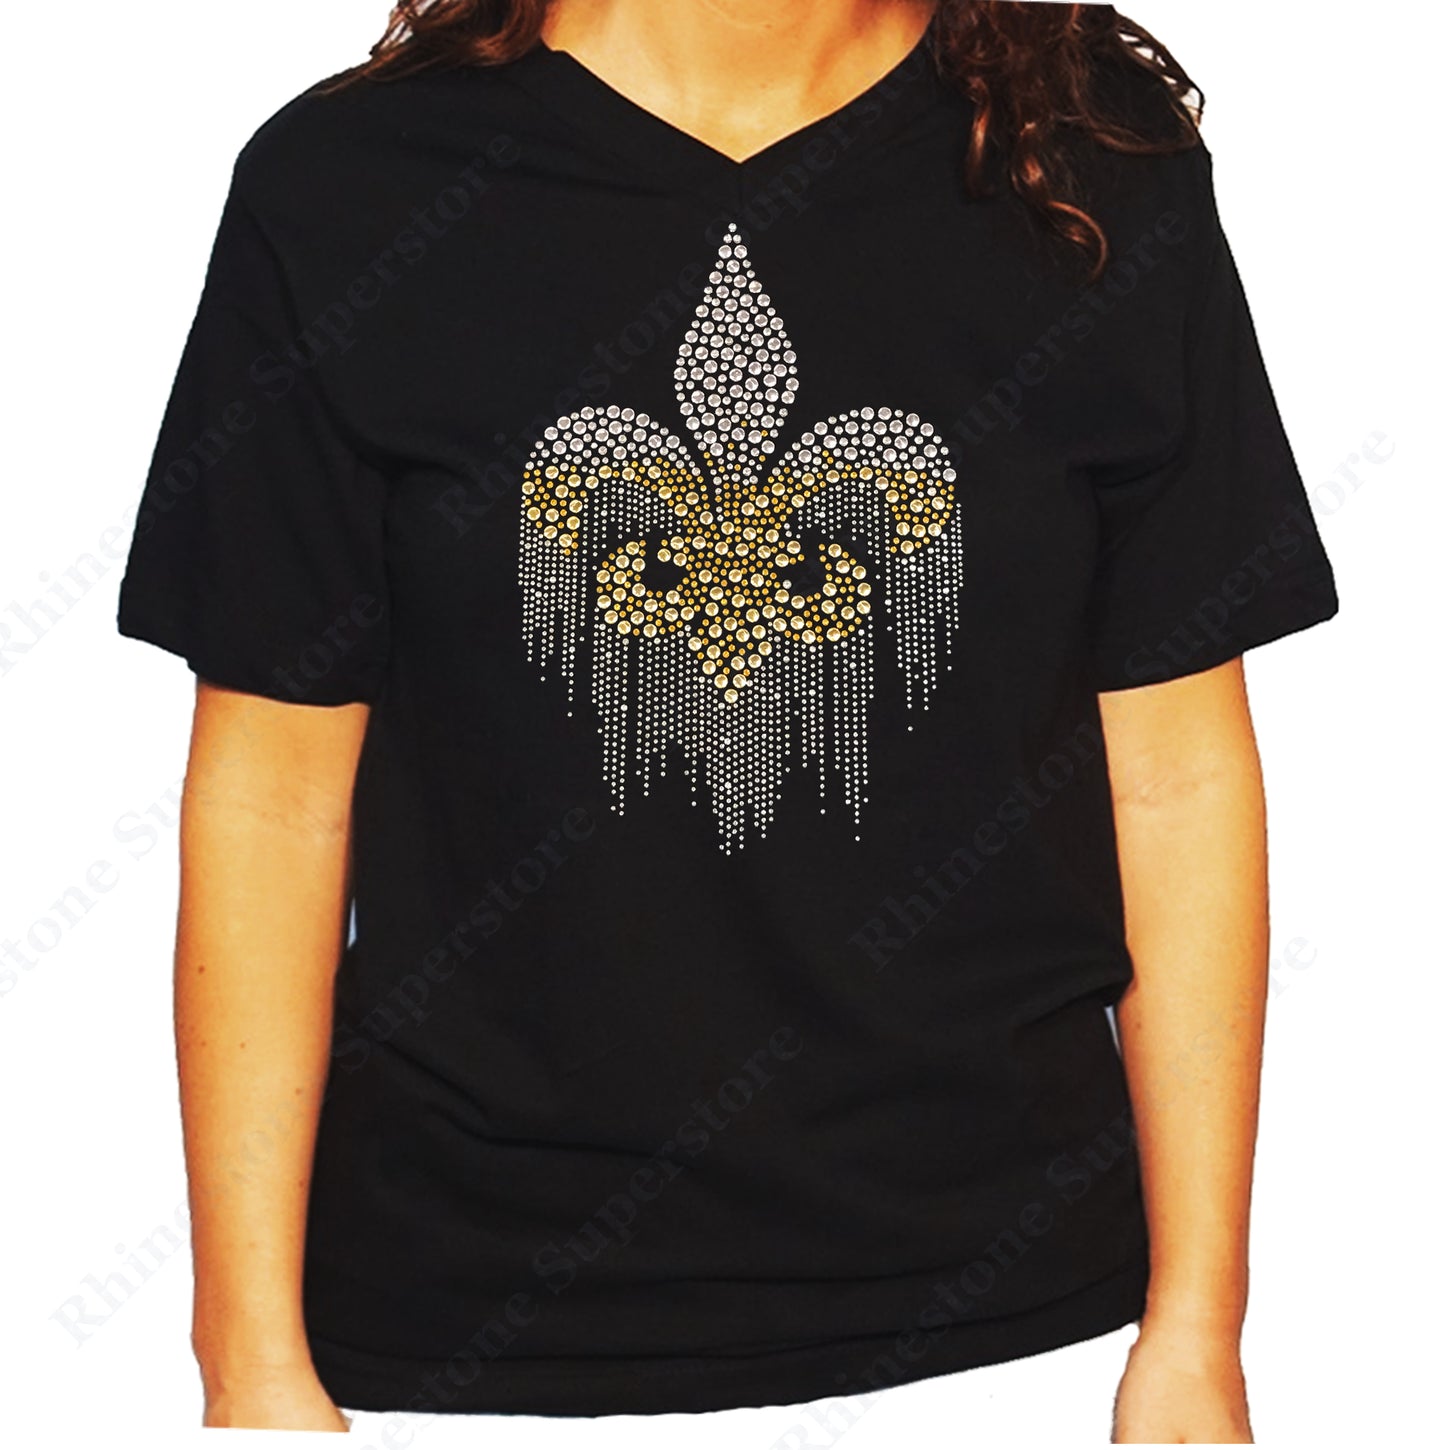 Women's / Unisex T-Shirt with Fluer de Lis Dripping in Silver and Gold Rhinestuds